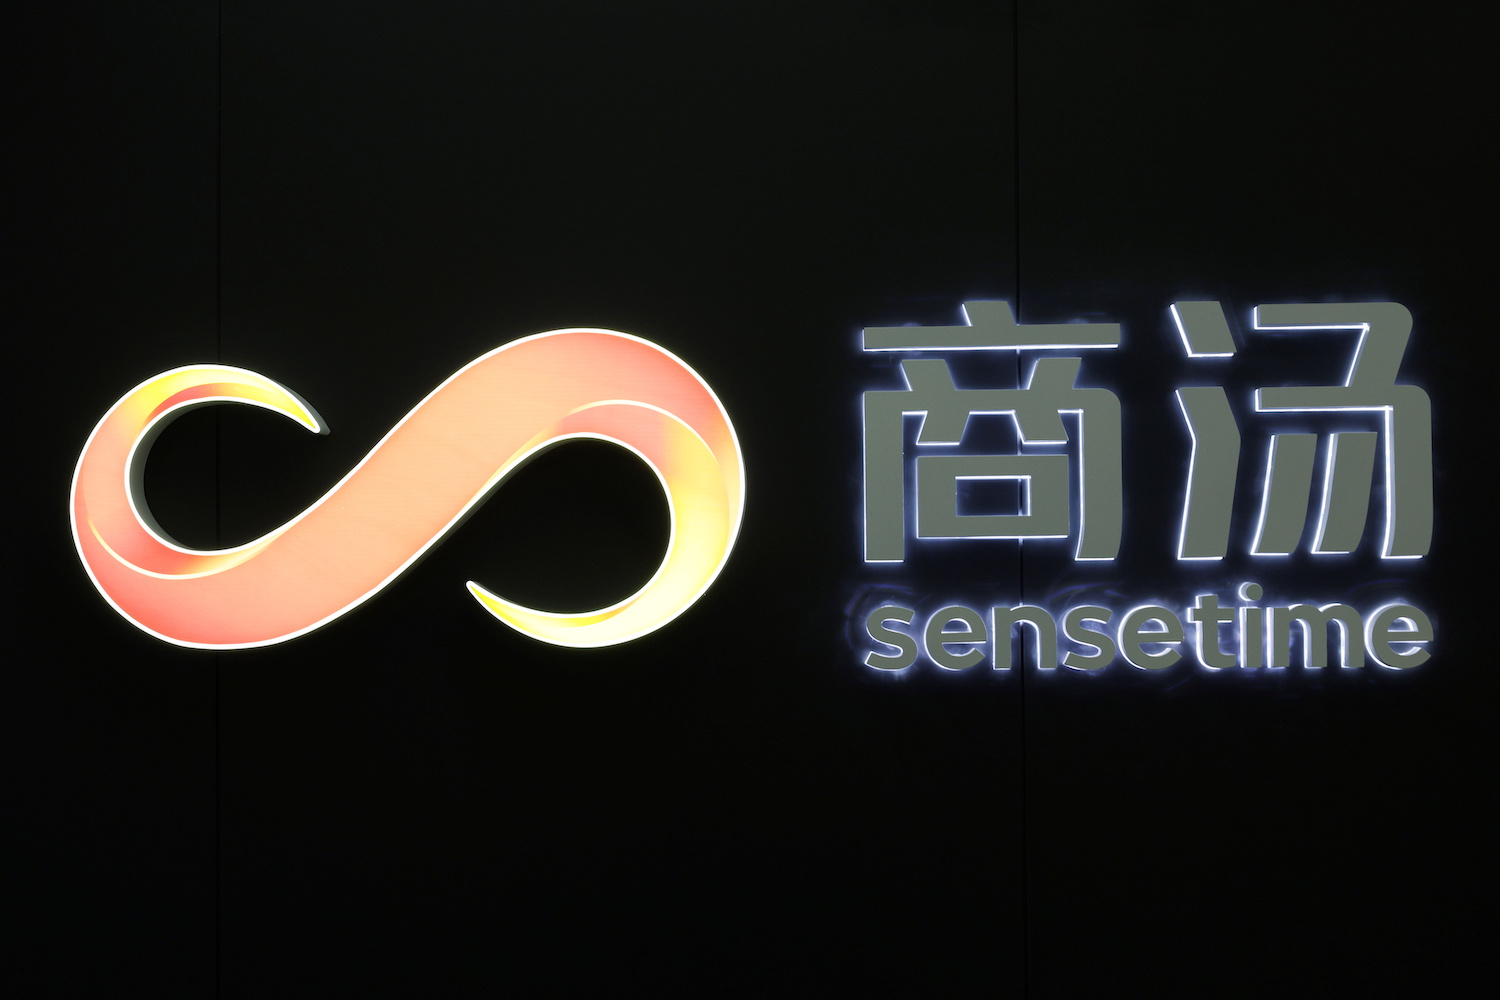 US to Blacklist China AI Firm SenseTime over Xinjiang: FT